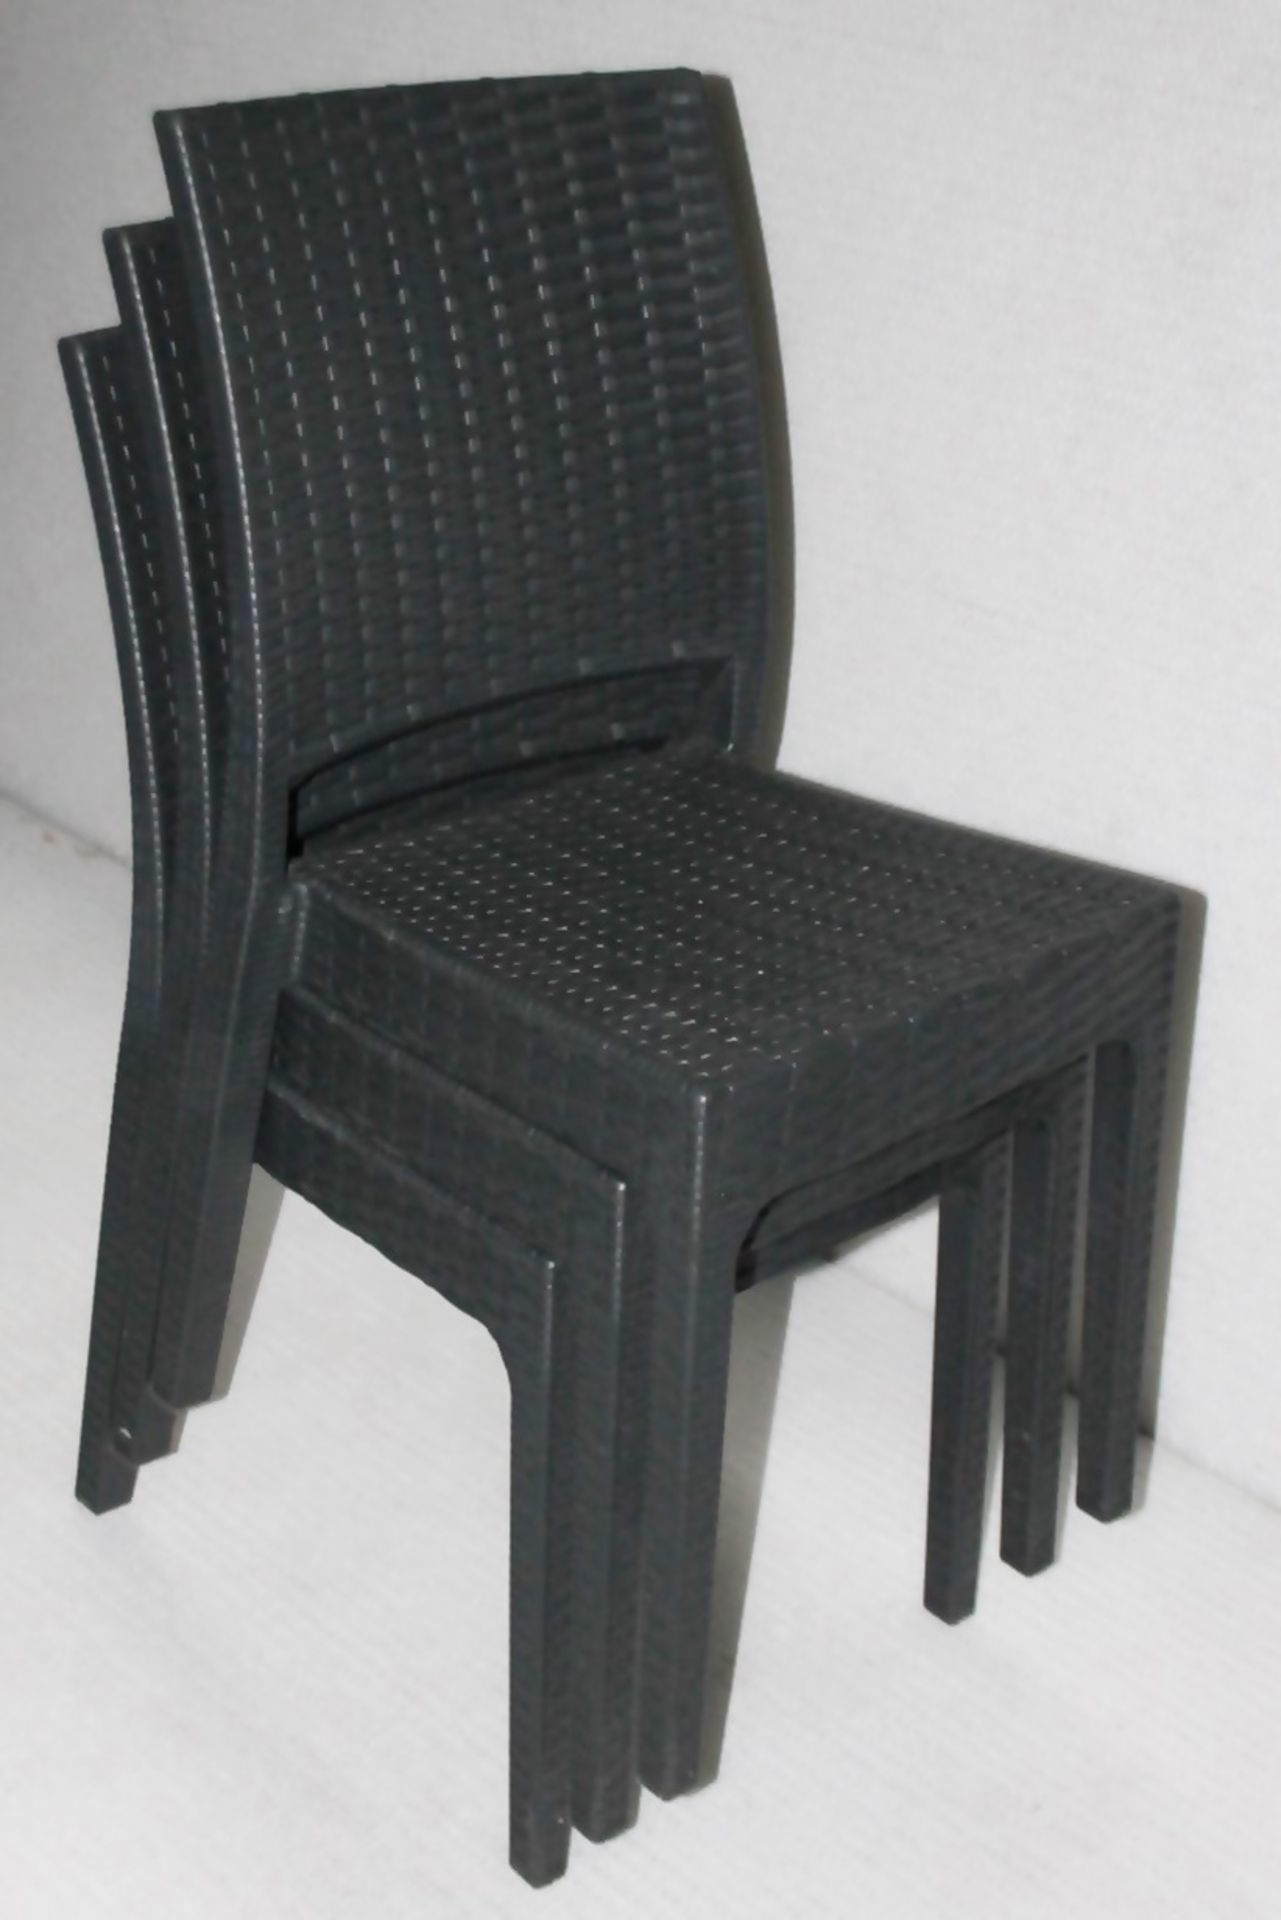 Commercial Outdoor Table & Chair Set - Includes 1 x Folding Bistro Table and 4 x Rattan Chairs - Image 7 of 20